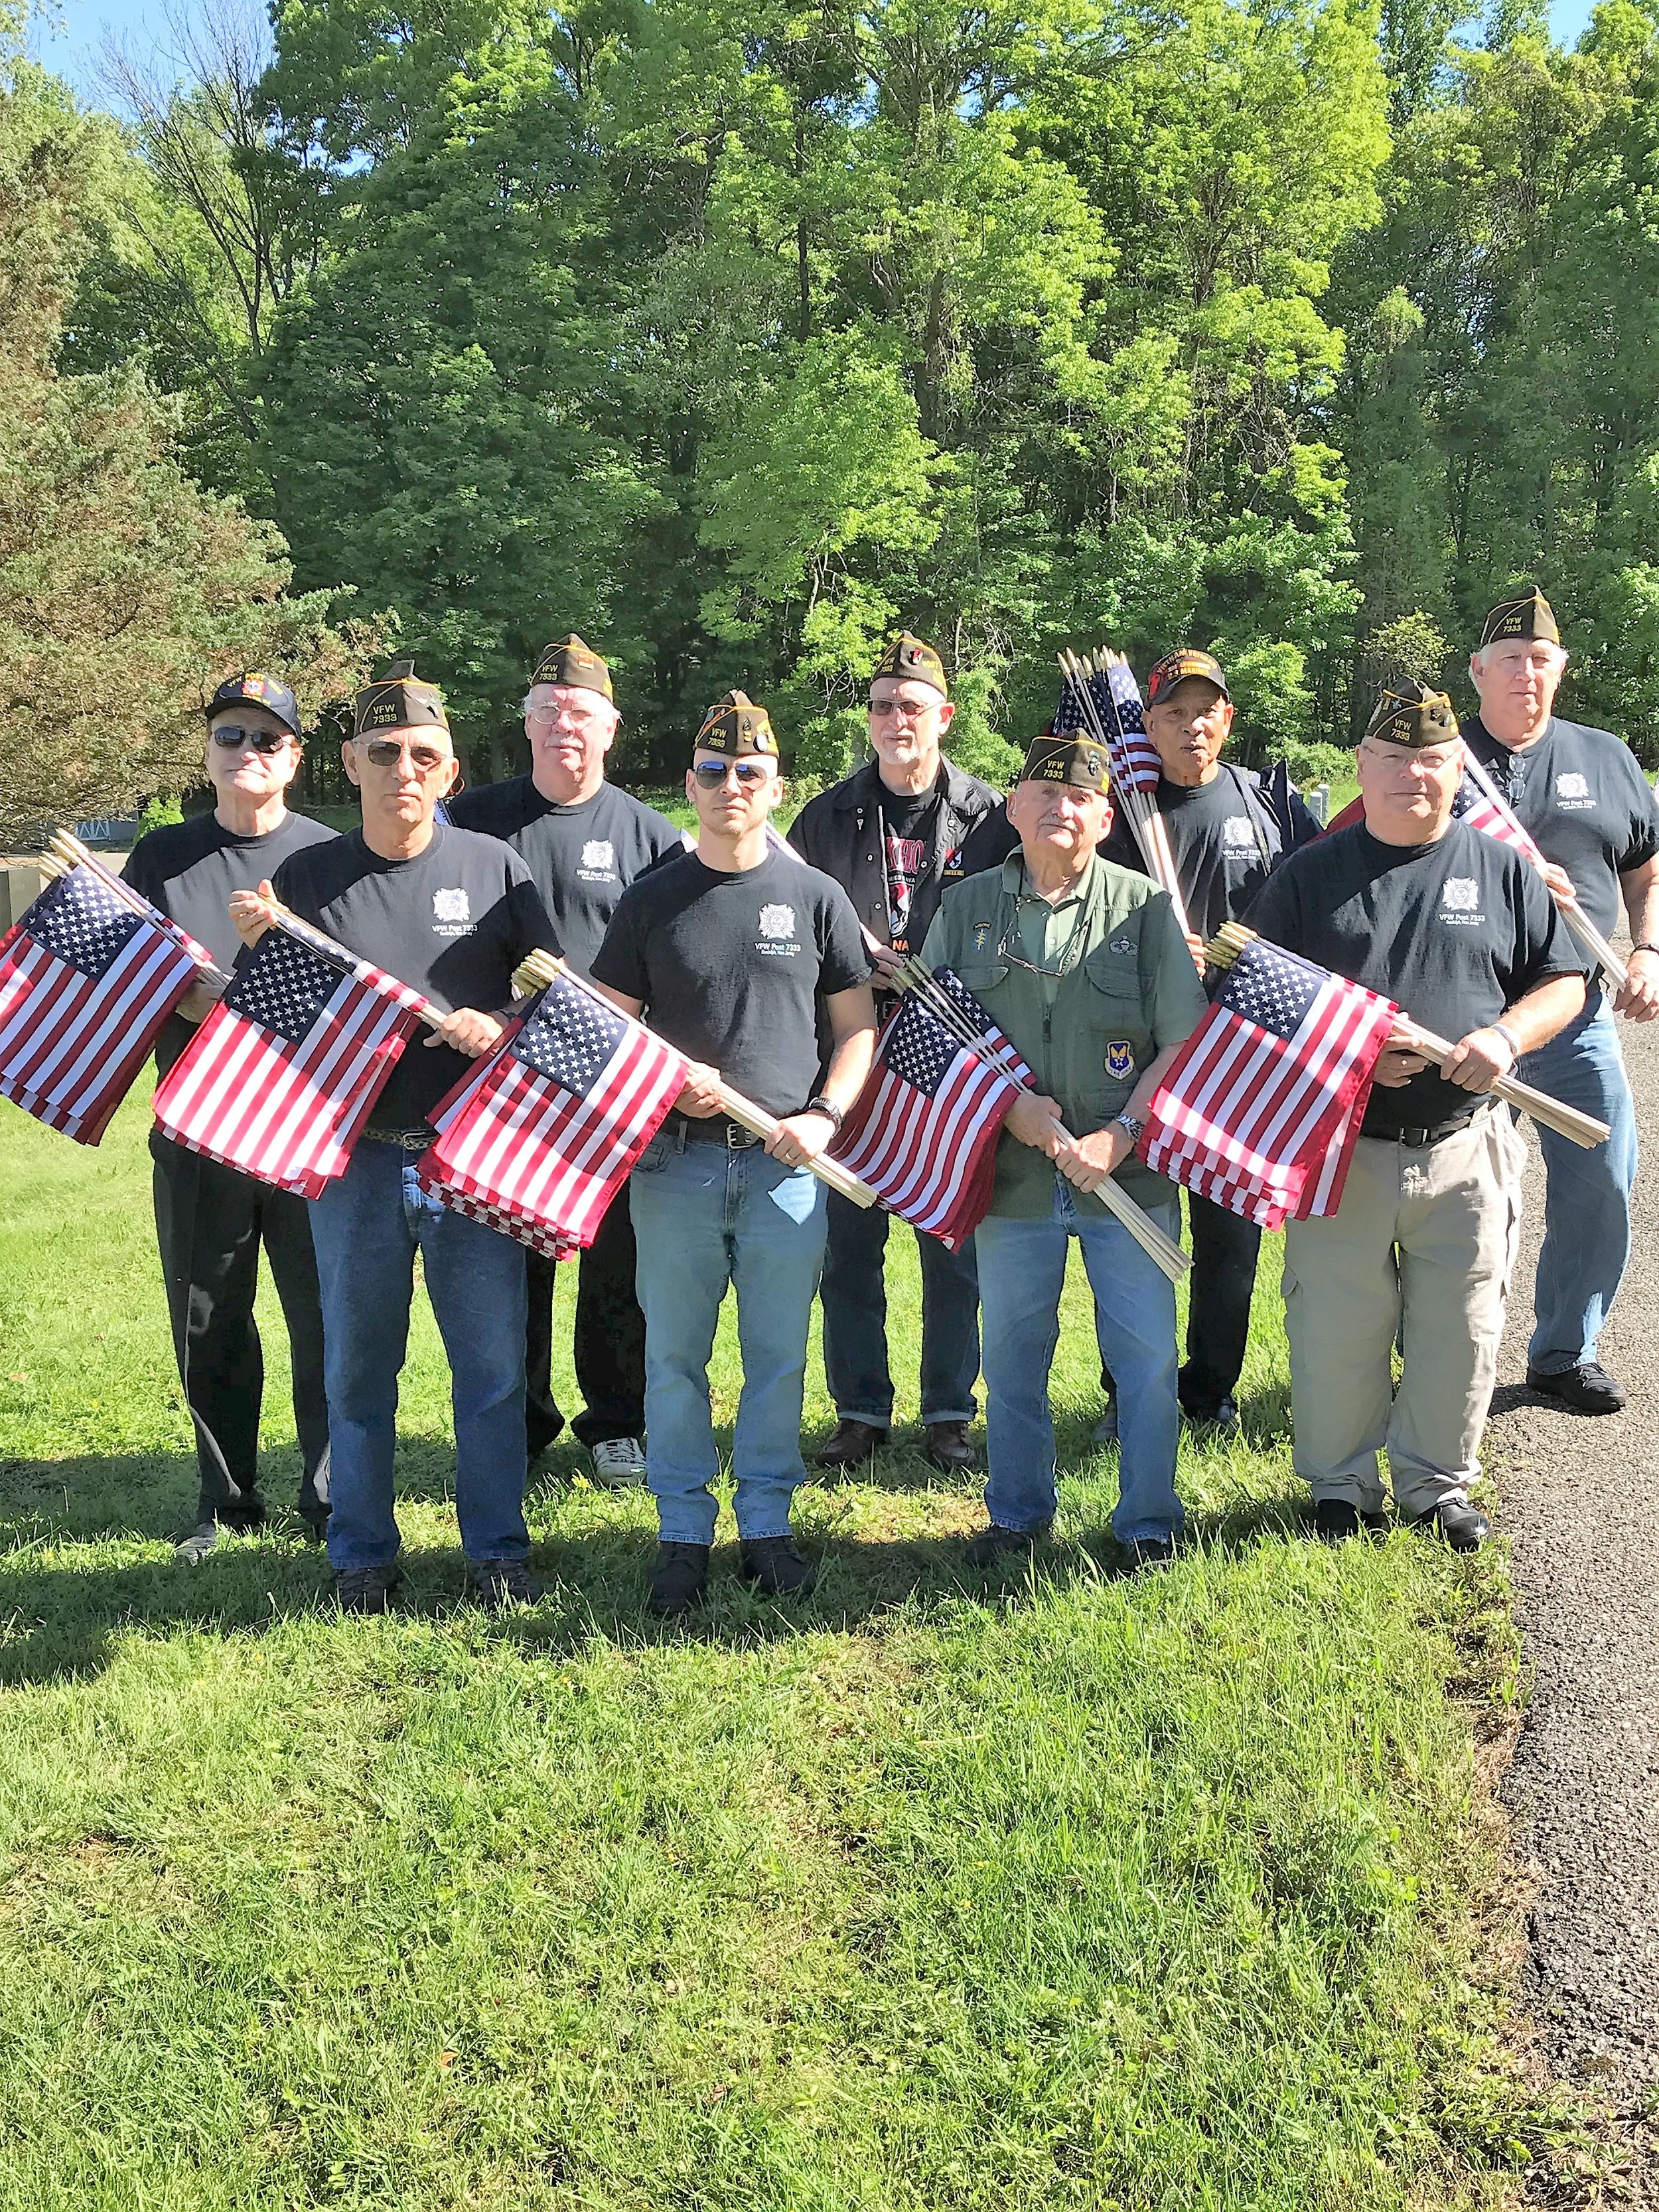  For Memorial Day our Post places flags on the graves of veterans in seven cemeteries in Randolph. Shown here (L to R) are Bill, Ken, John, Scott, Len, the Colonel, Emerson, Ted, Dan. Quartermaster Jack took the photo. We were honored to express our 